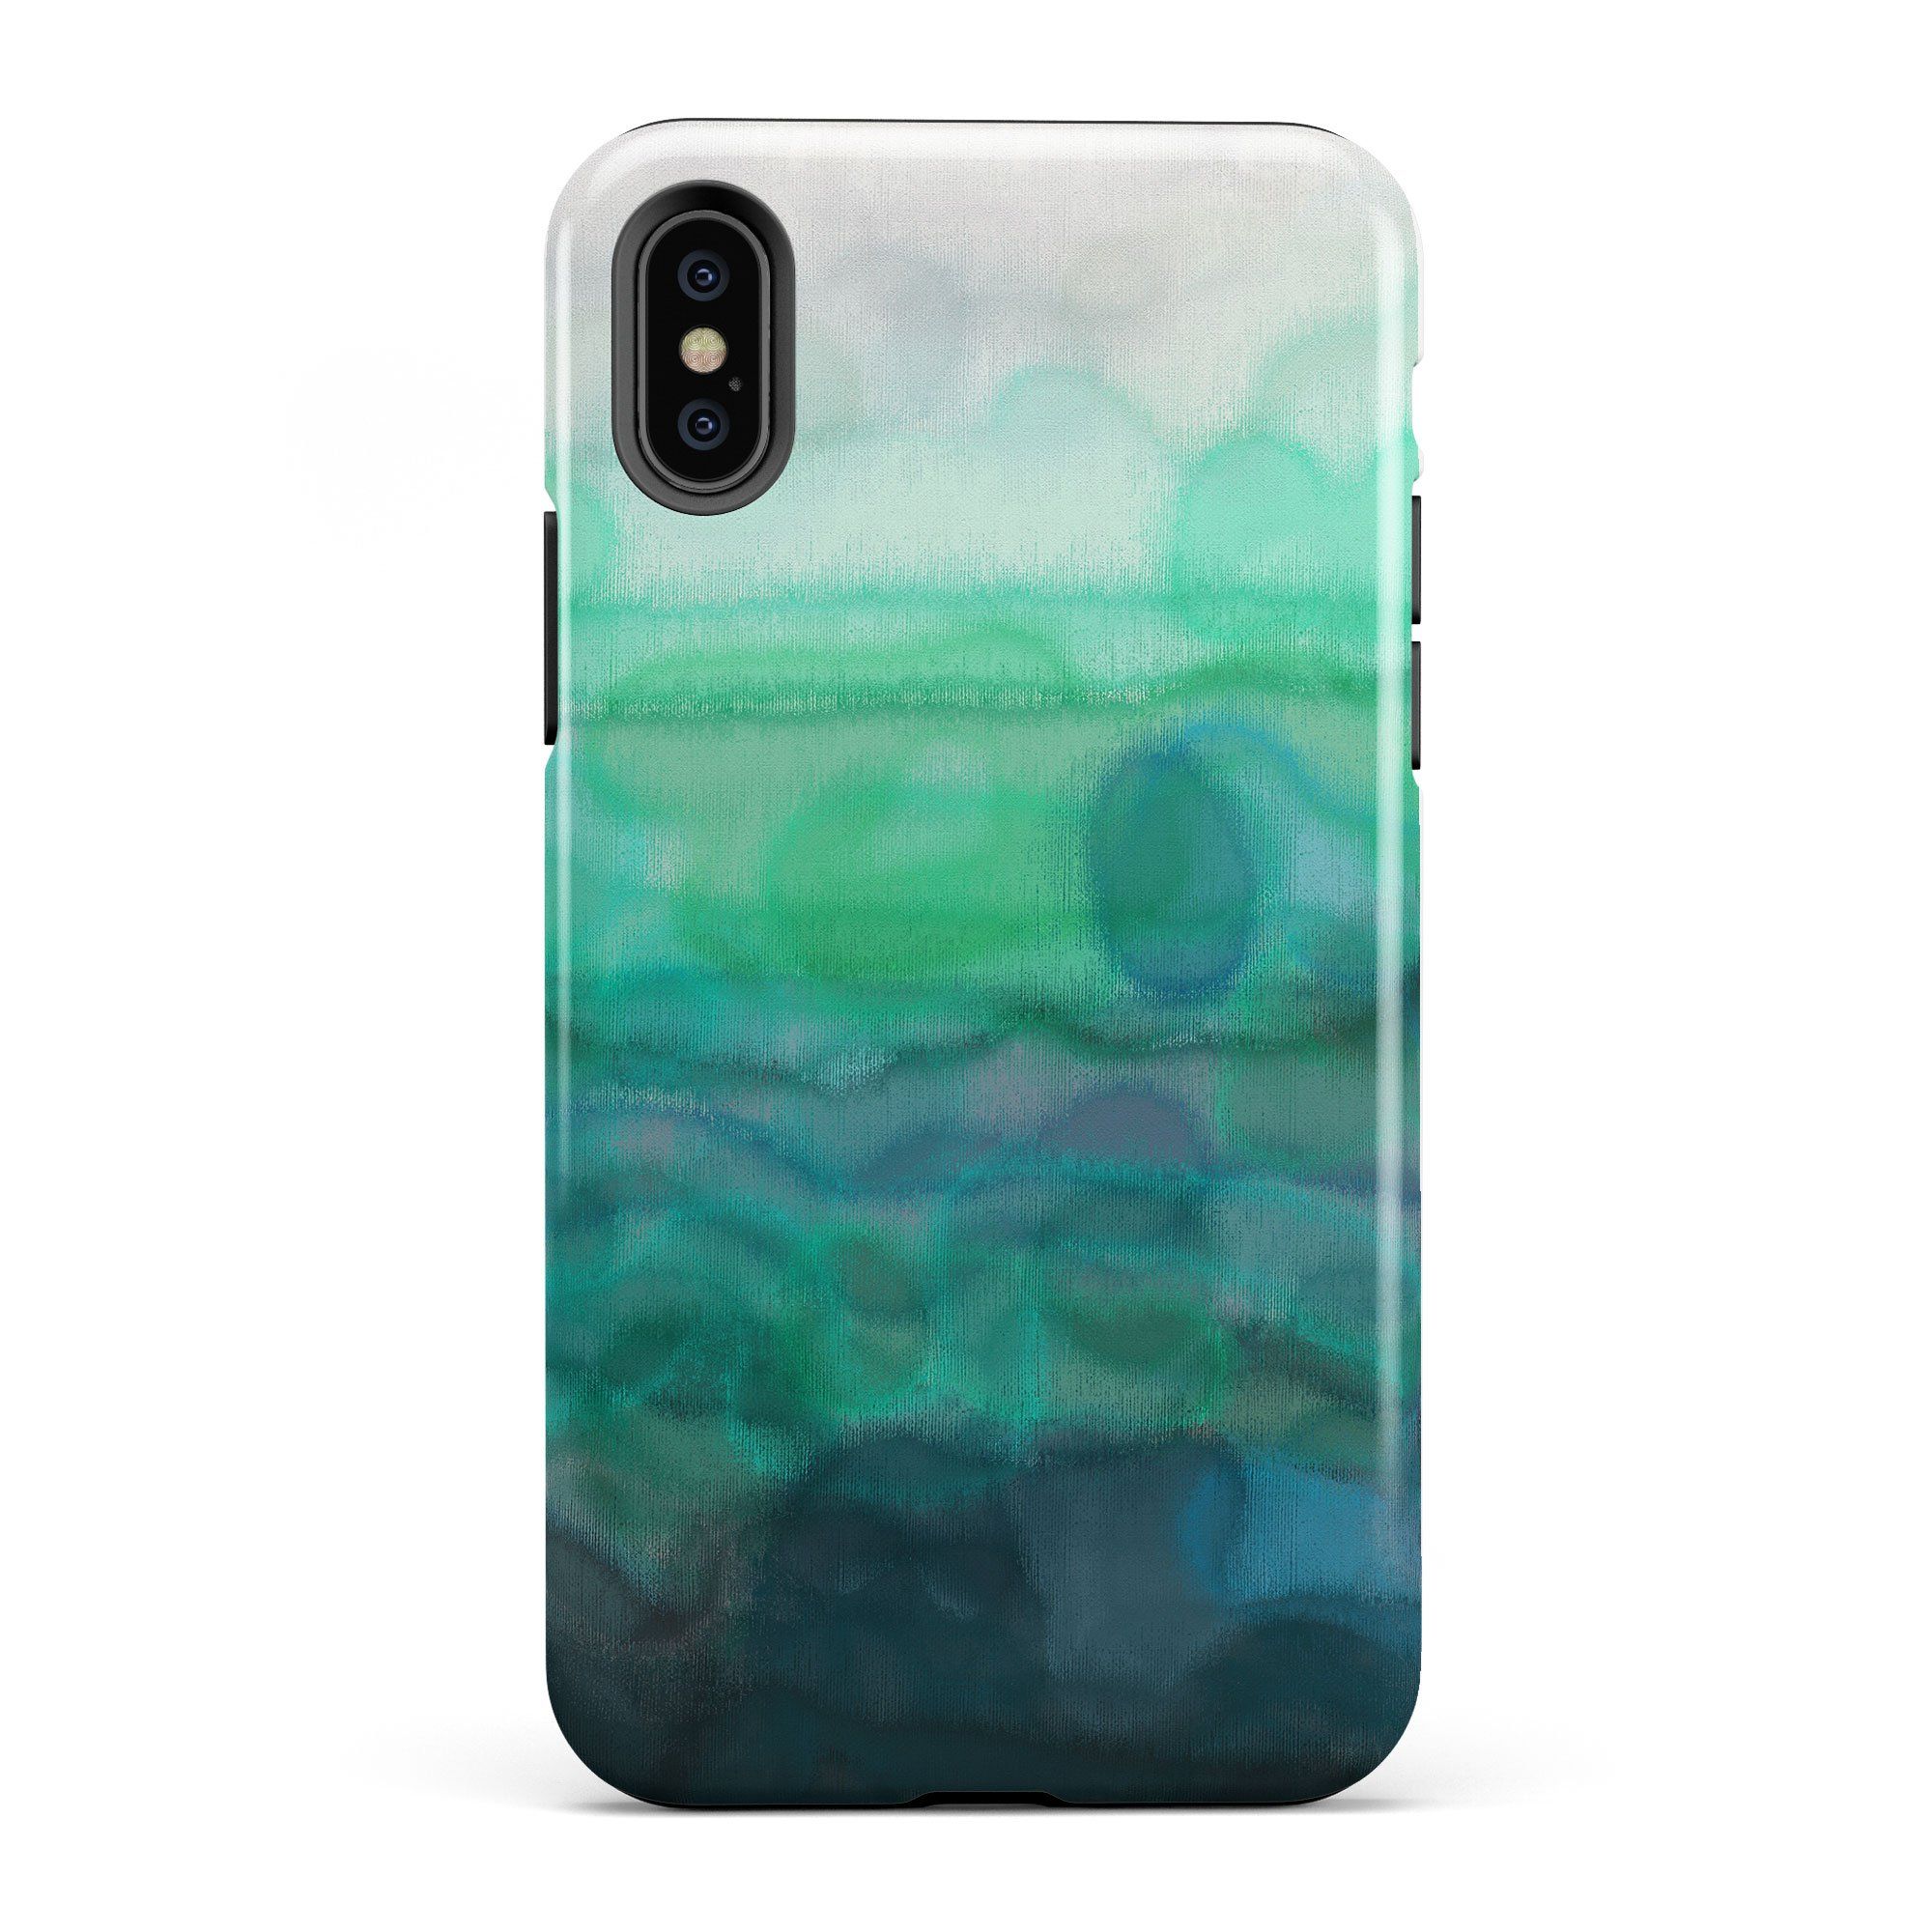 Teal 'Serenity' iPhone Case